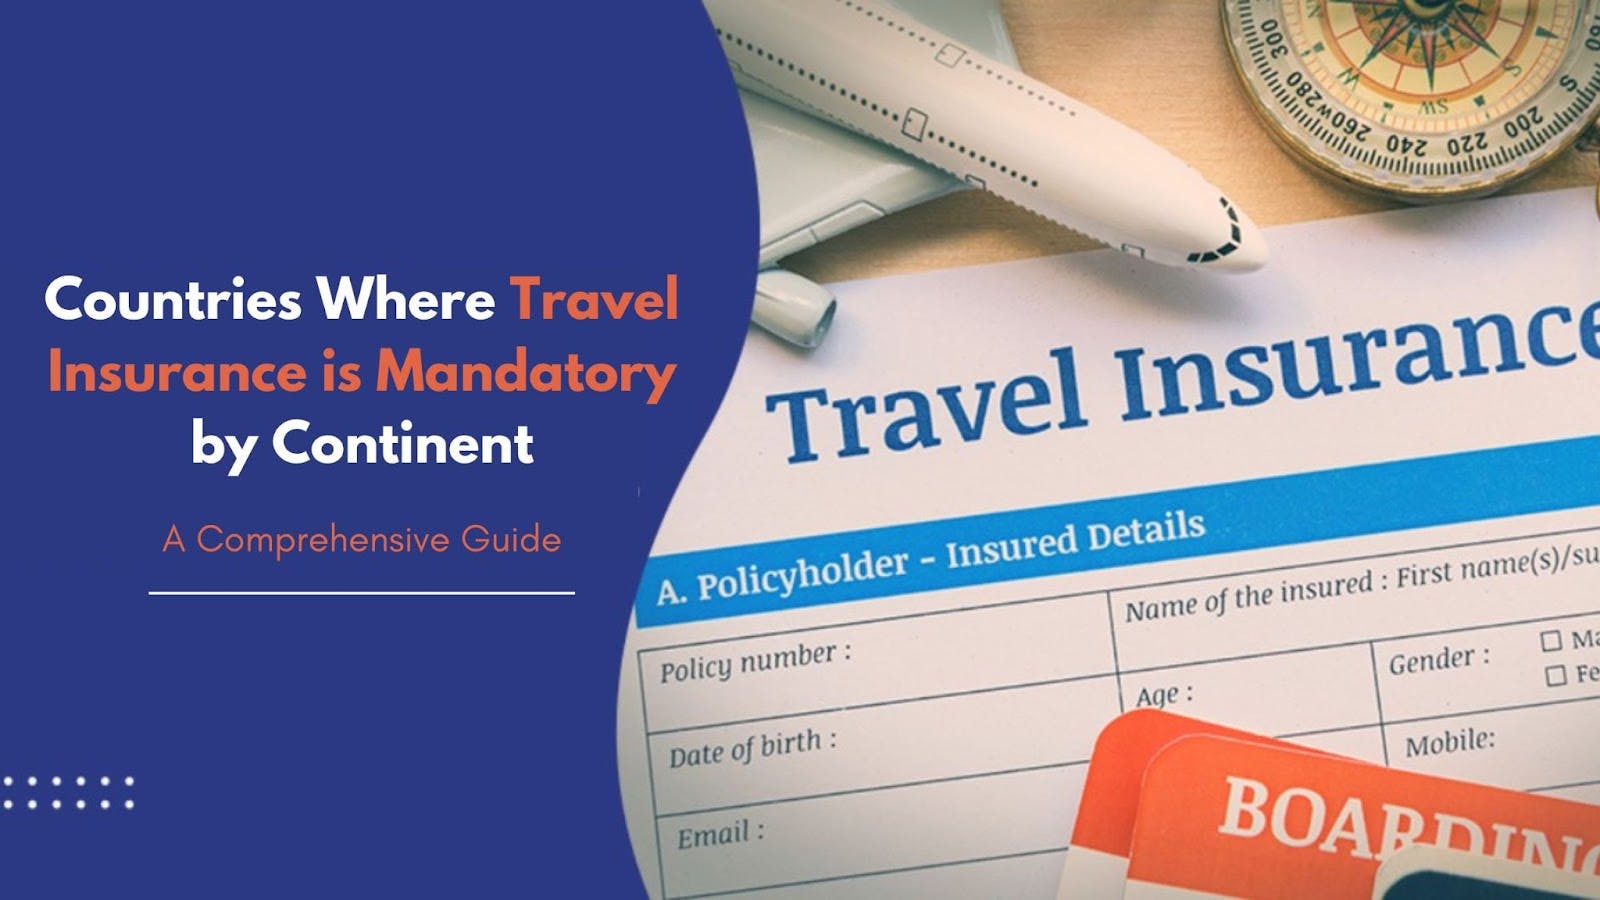 List of Countries Where Travel Insurance is Mandatory